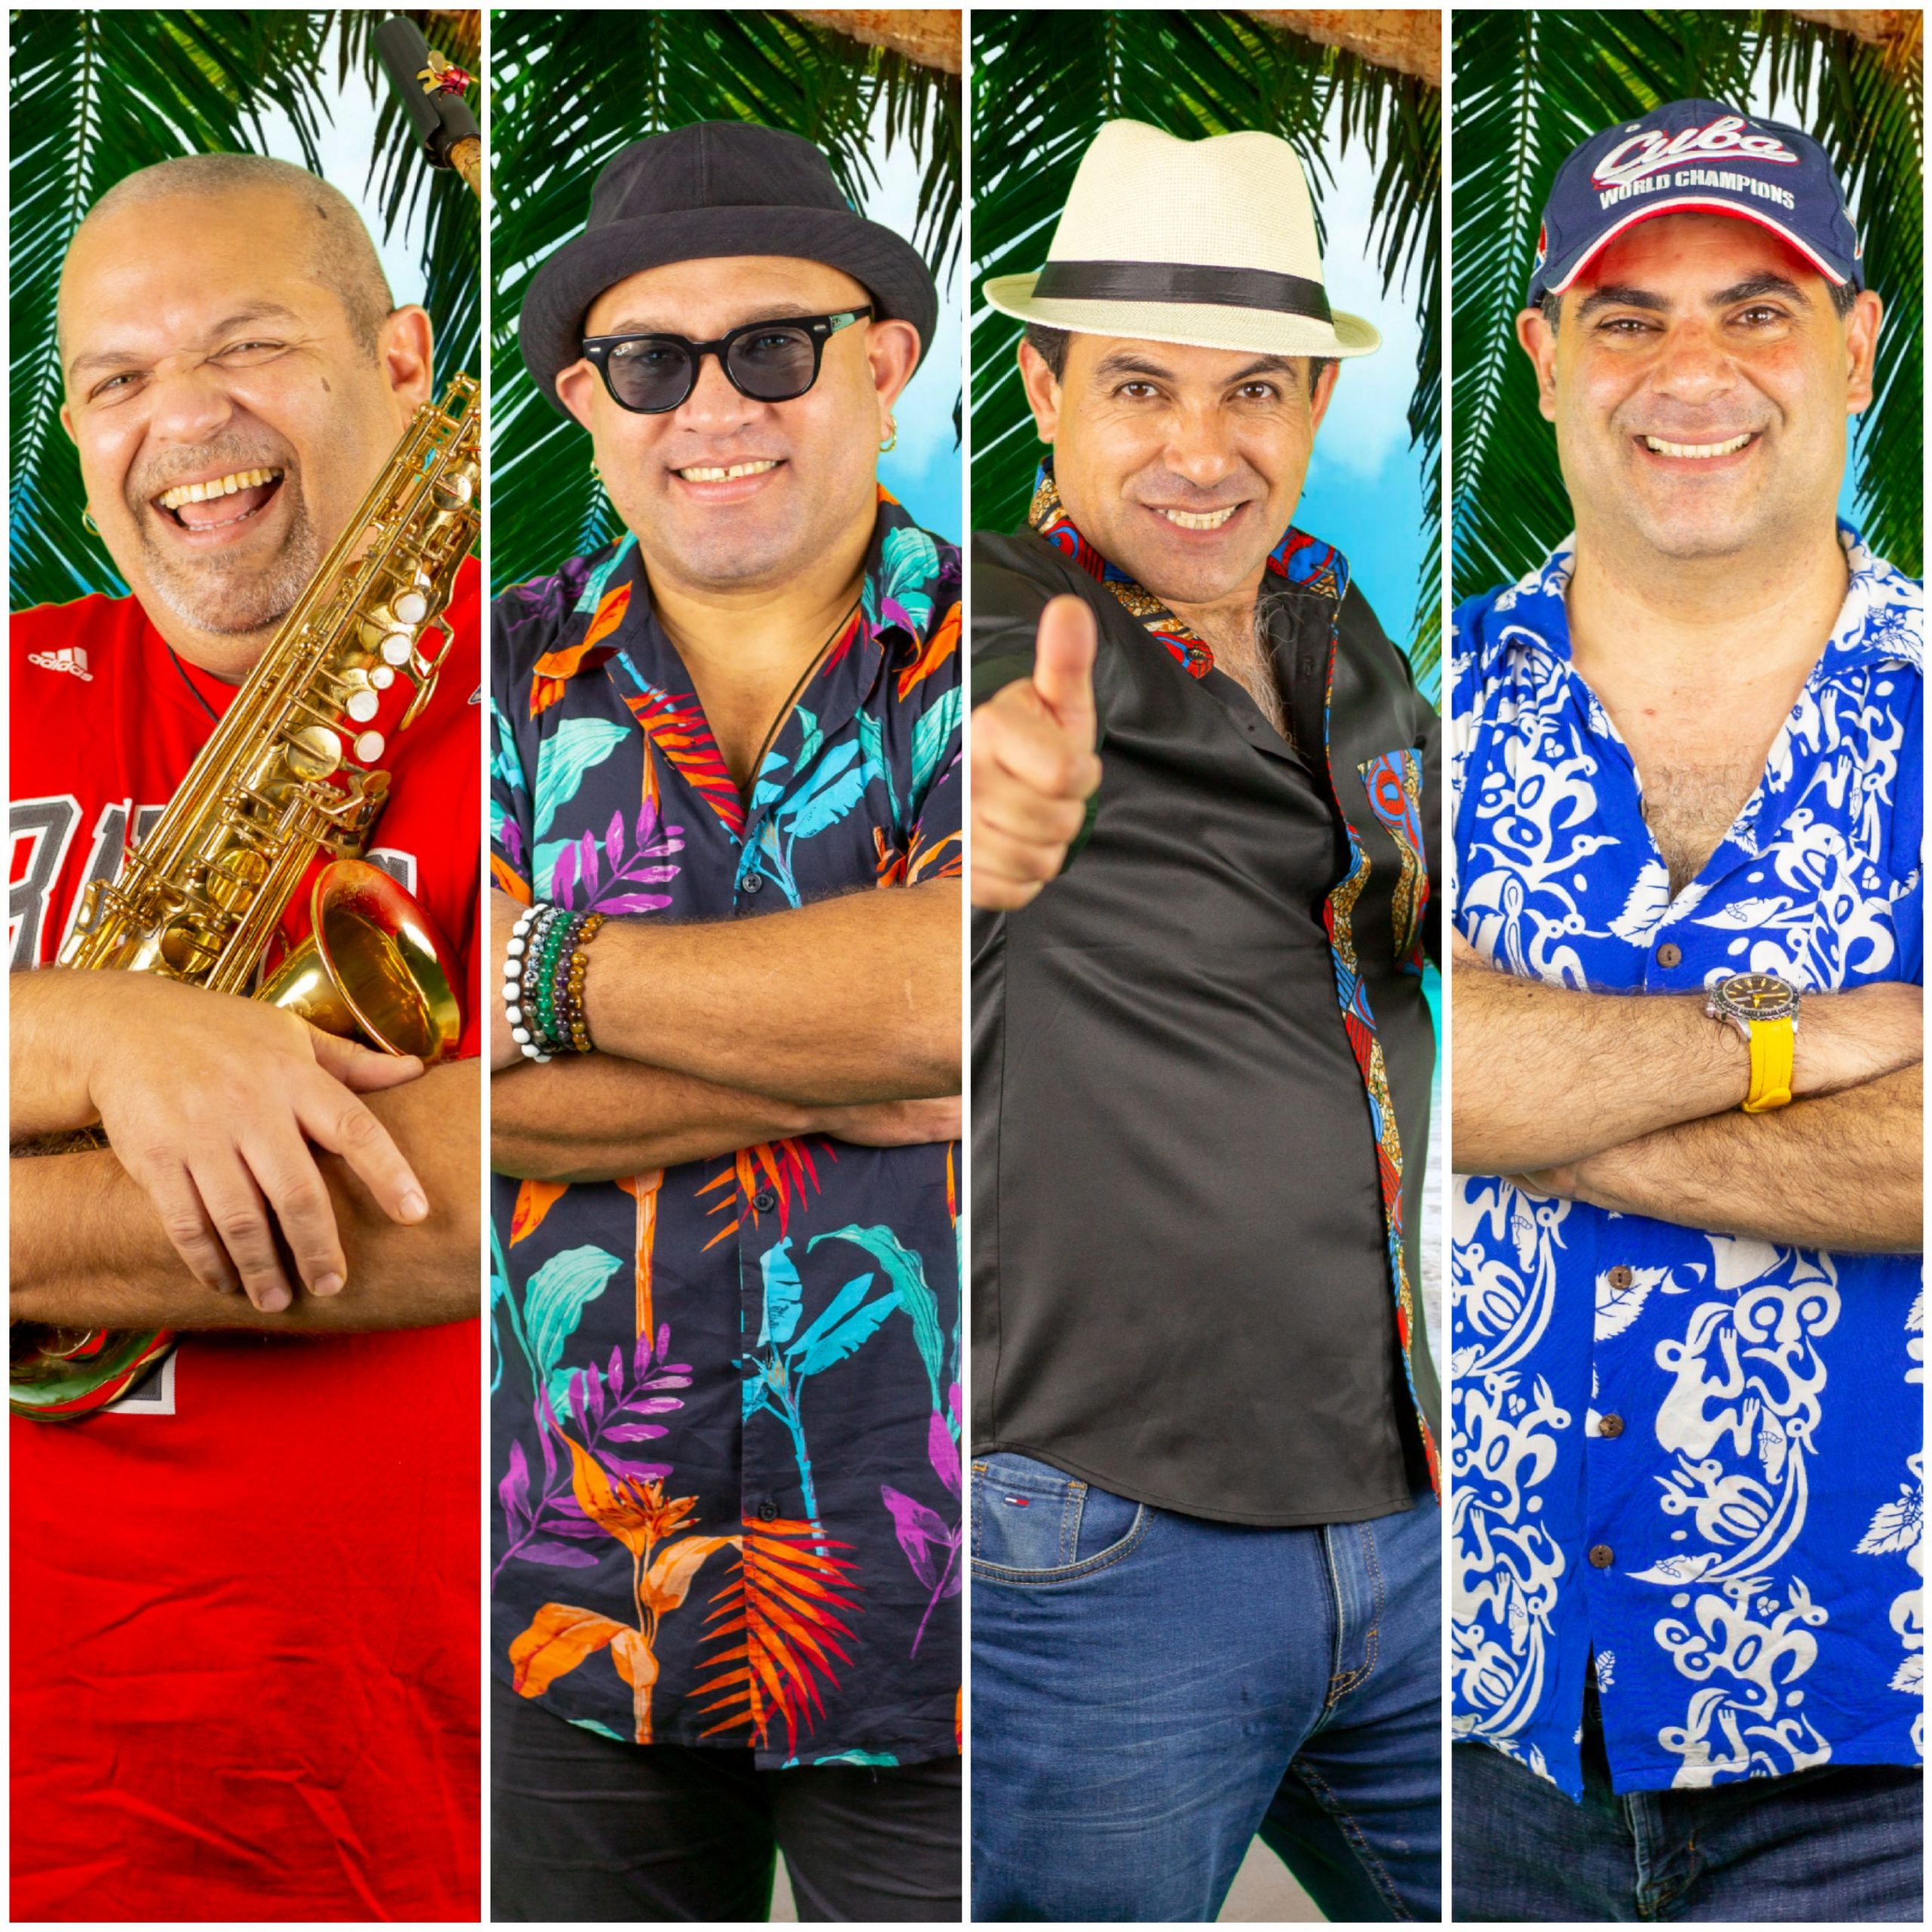 Masters of salsa, merengue, montuno and cubatón, Check out “Sultanes del Ritmo”.